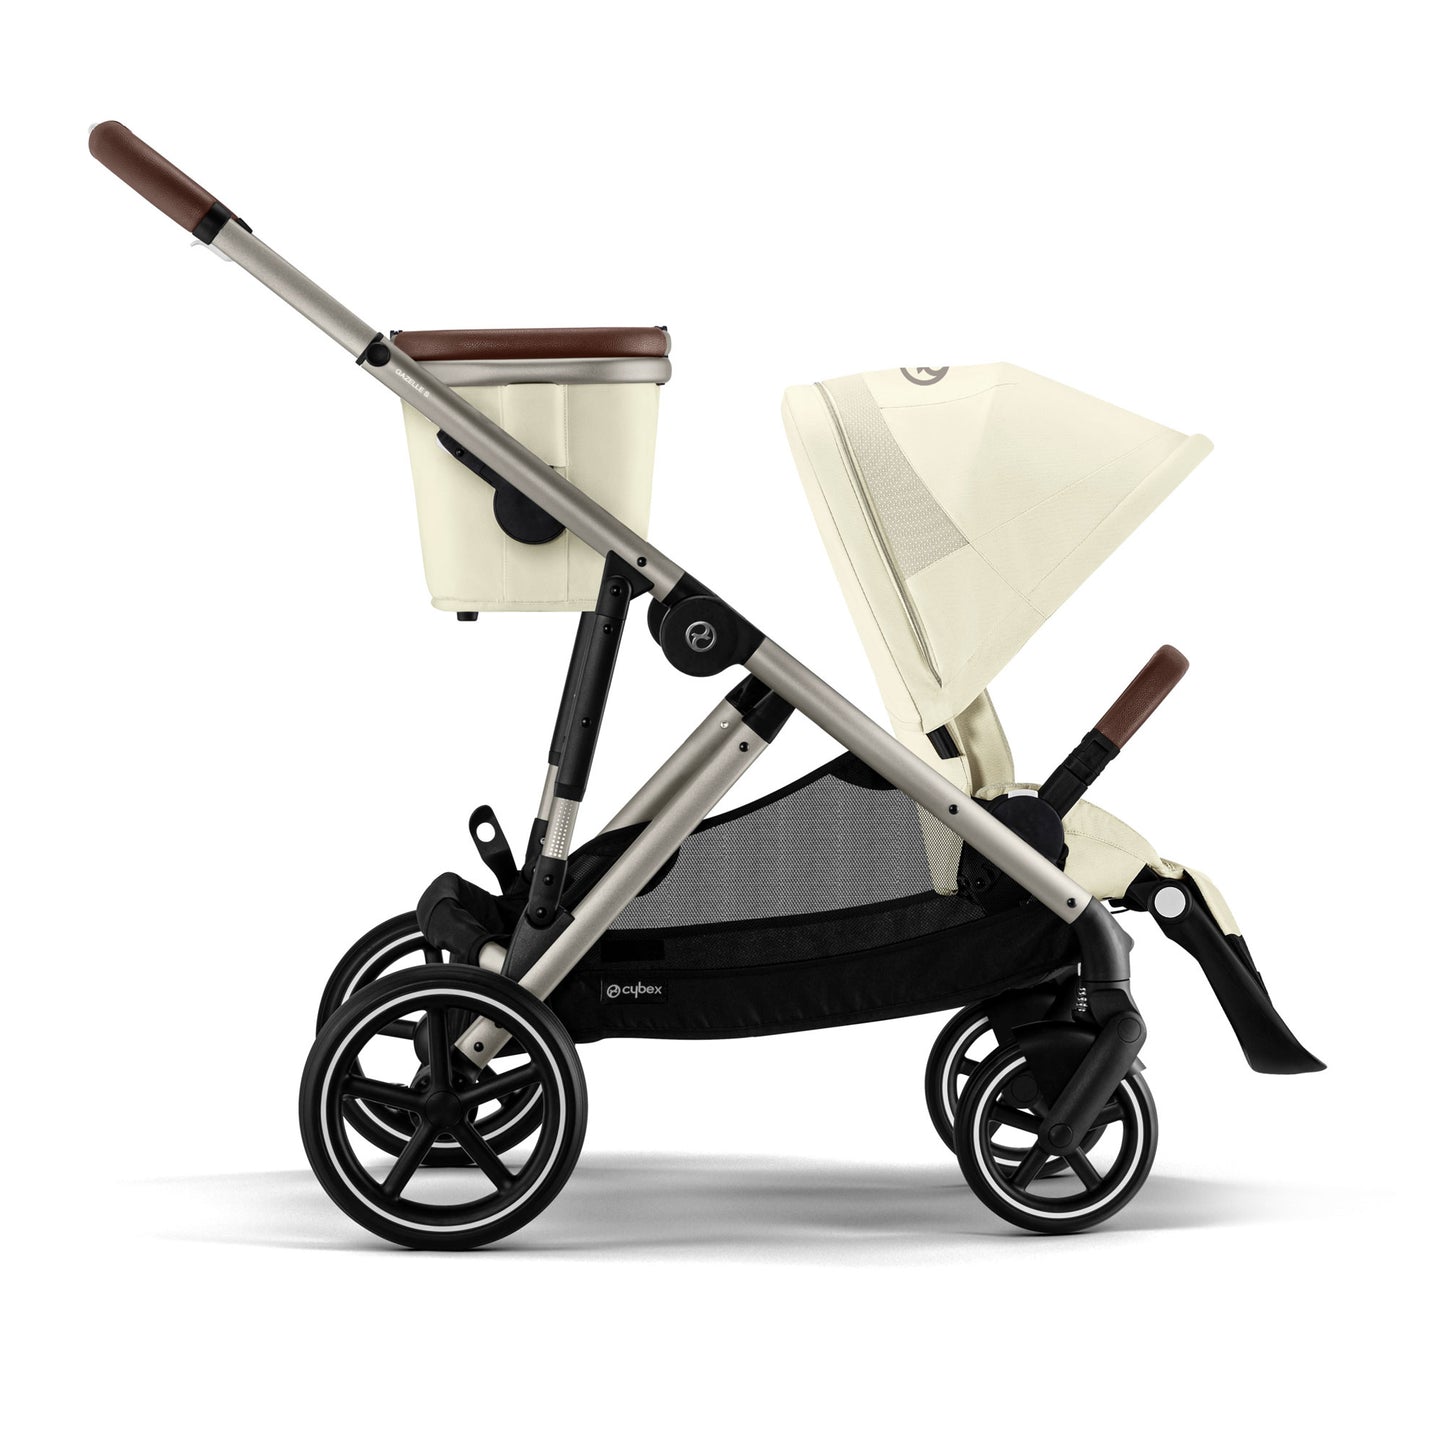 Cybex Gazelle S 2 Stroller - Seashell with Taupe Frame